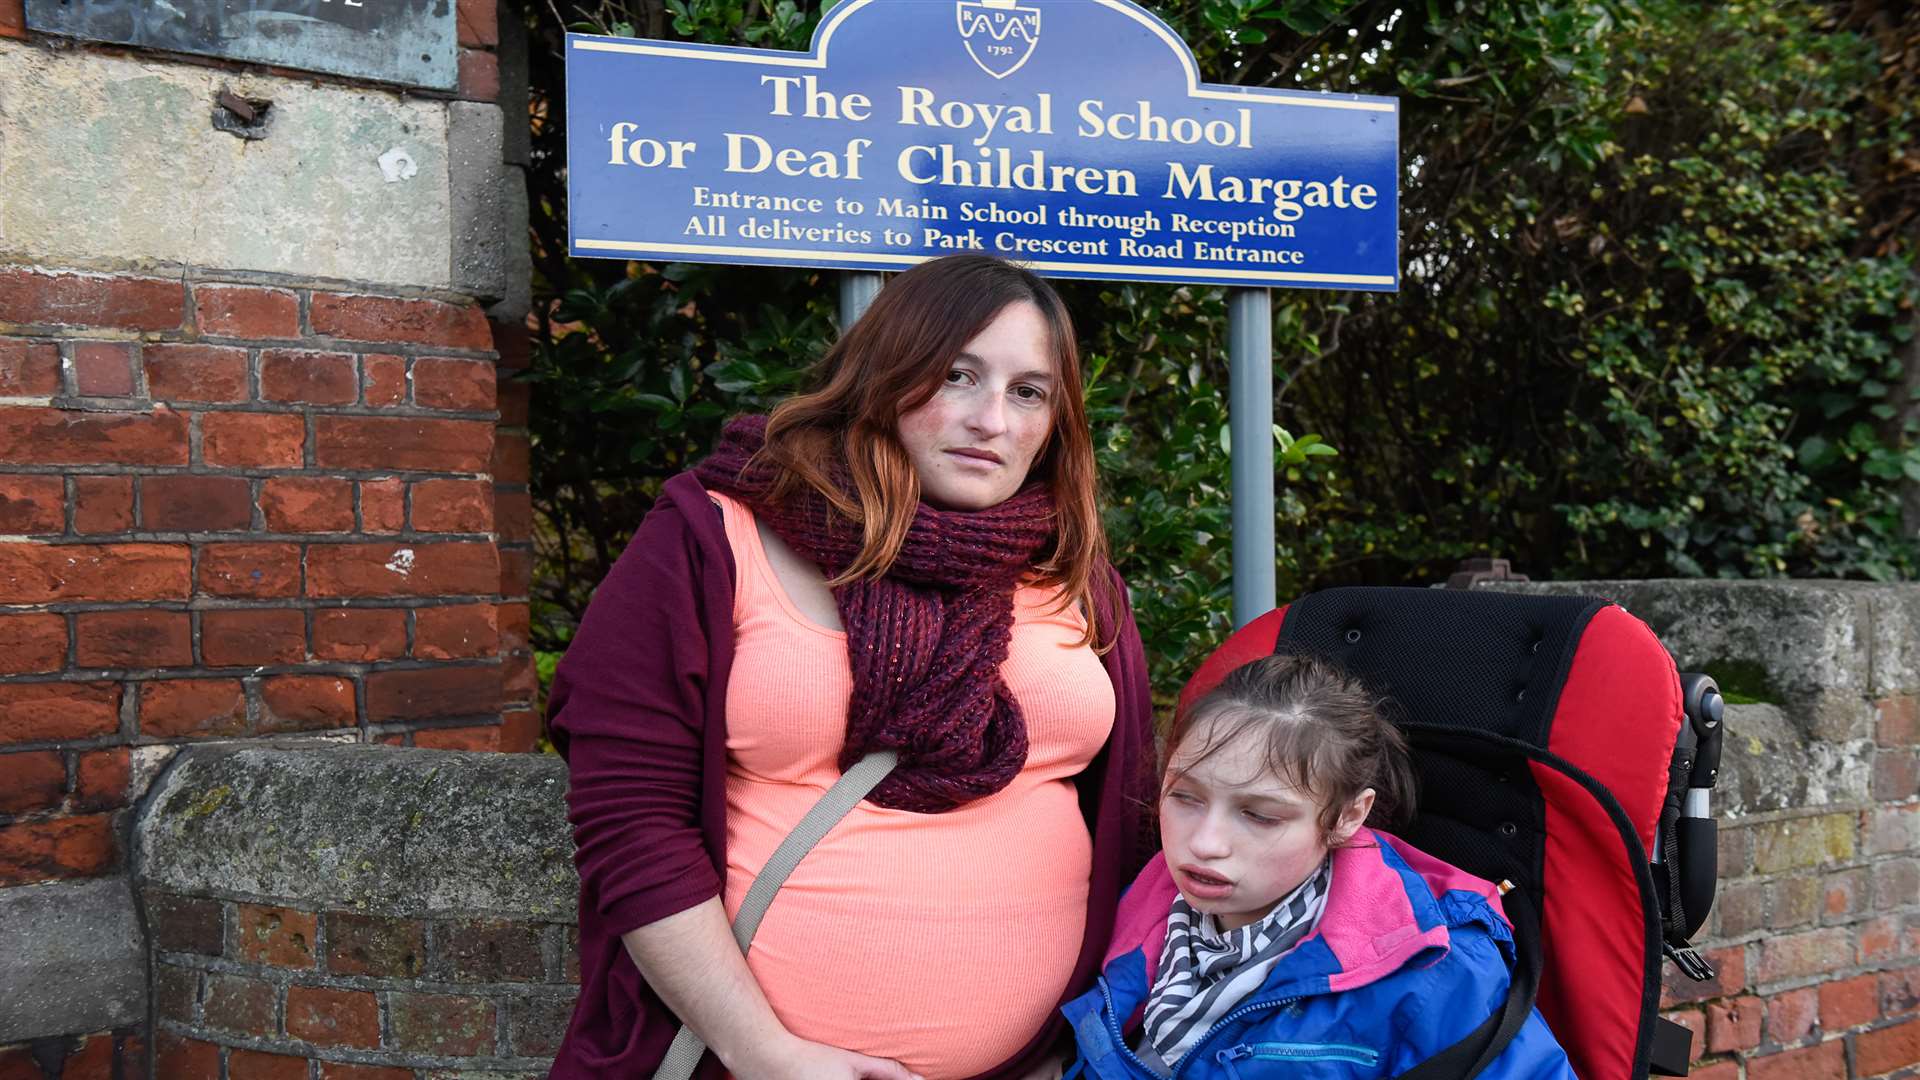 Kimberly Carrara, who set up a Facebook appeal page to save the school, with her 11-year-old daughter Sasha.